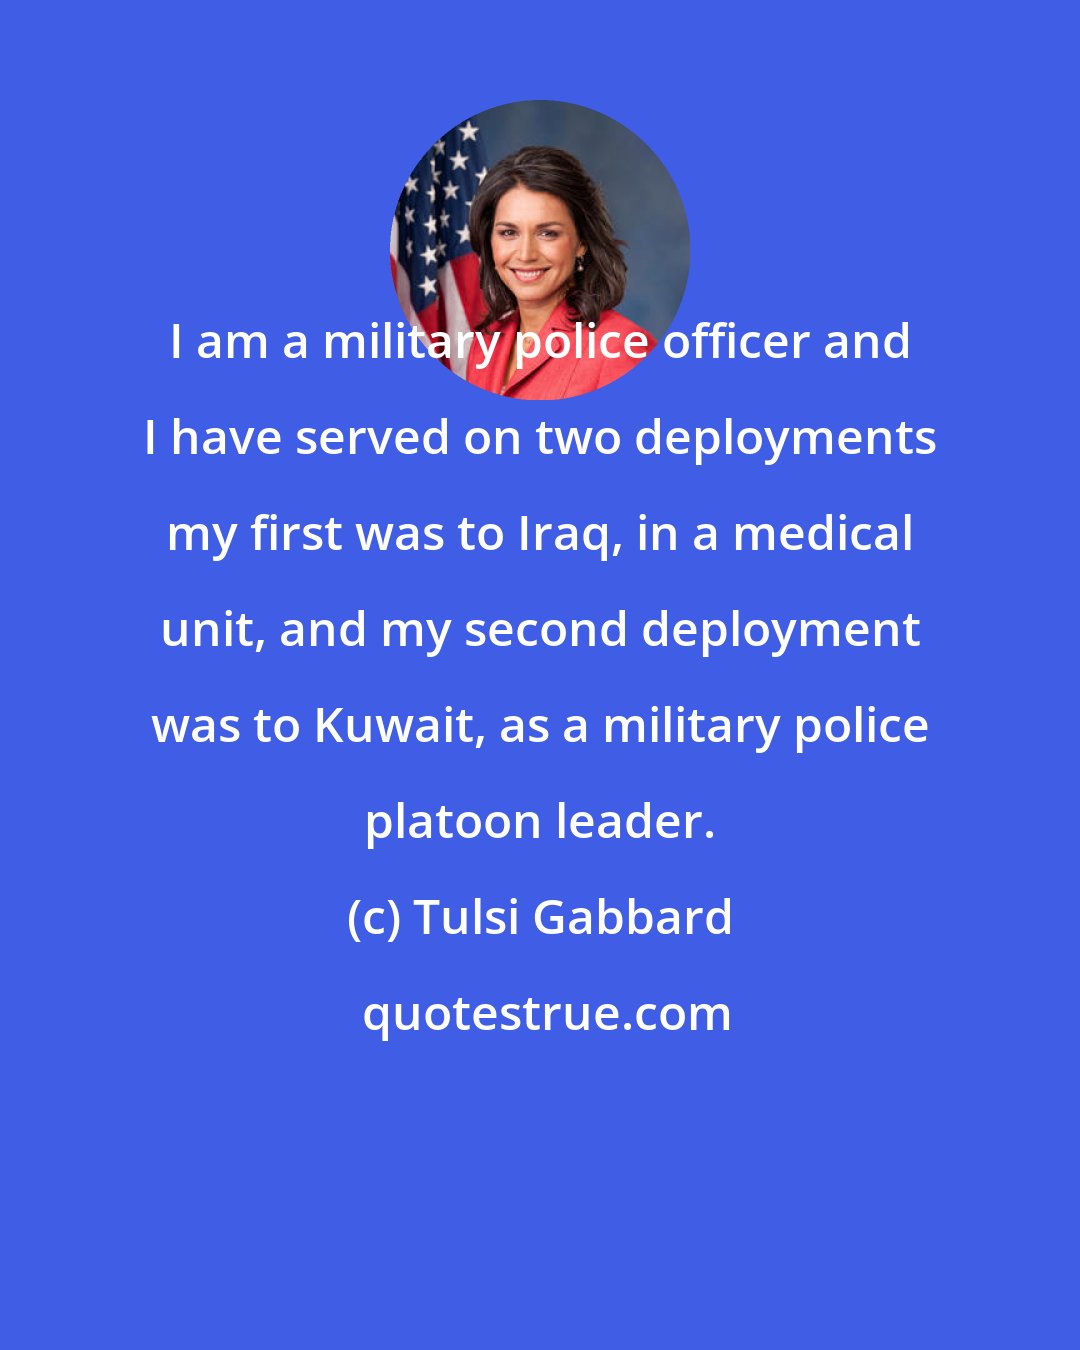 Tulsi Gabbard: I am a military police officer and I have served on two deployments my first was to Iraq, in a medical unit, and my second deployment was to Kuwait, as a military police platoon leader.